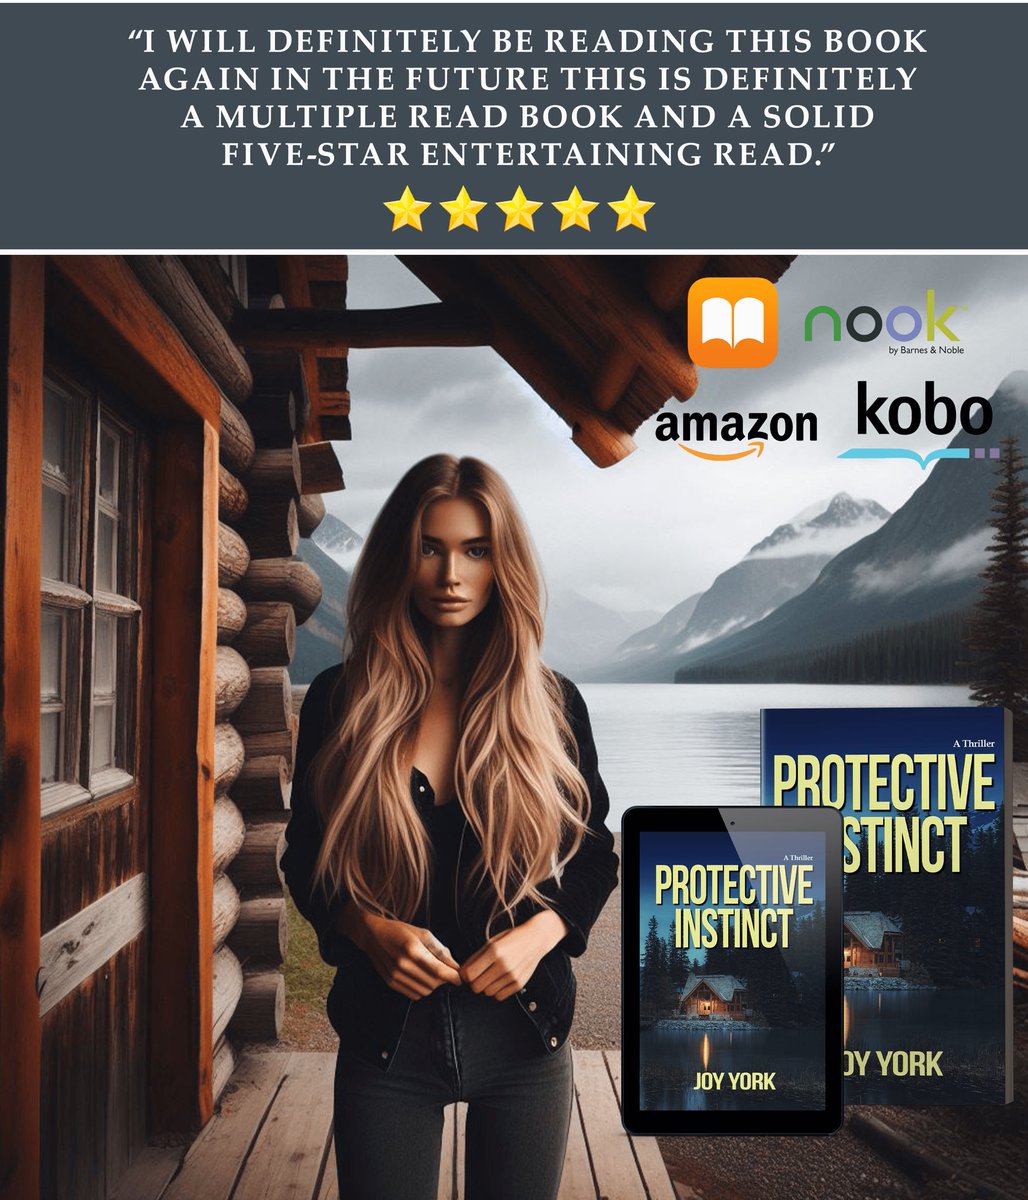 Protective Instinct: A Thriller Ebook on sale for #99cents til 6/16/2024. ⭐️ ⭐️⭐️⭐️⭐️ Review: “Author Joy York's novel Protective Instinct is a thrilling escape narrative blending suspense, crime, and intensive action.” #thriller #mystery #actionadventure